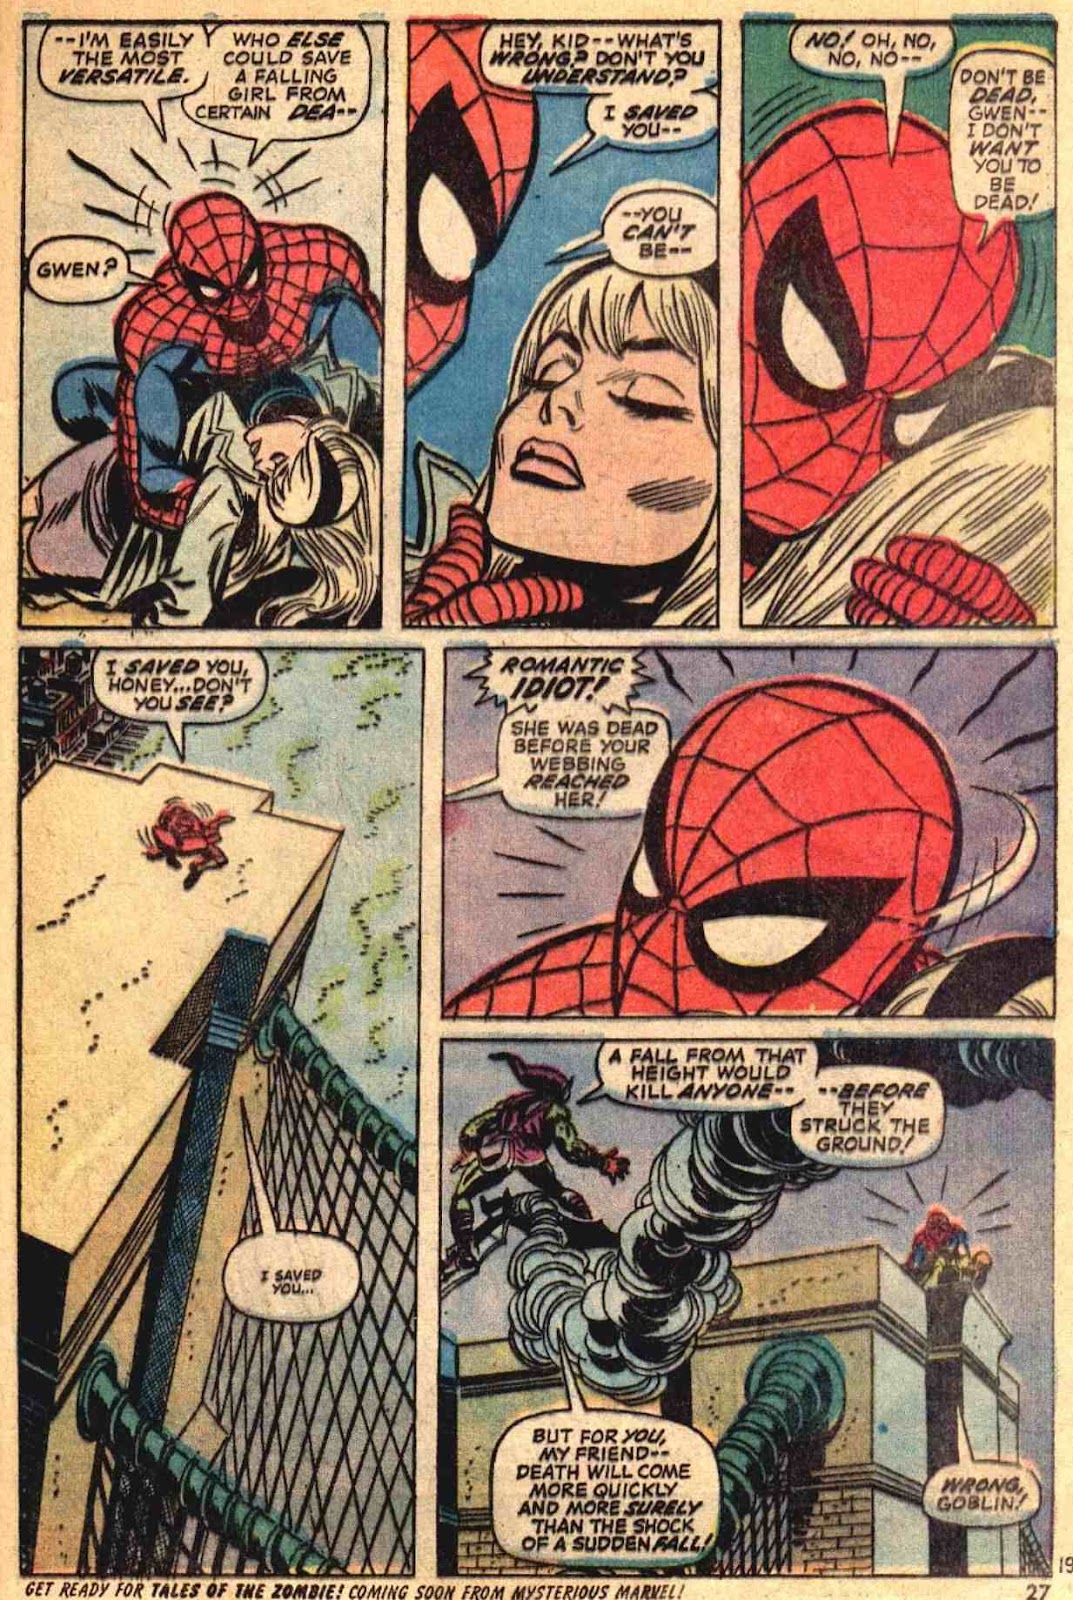 Spider-man: Death Of The Stacys #29